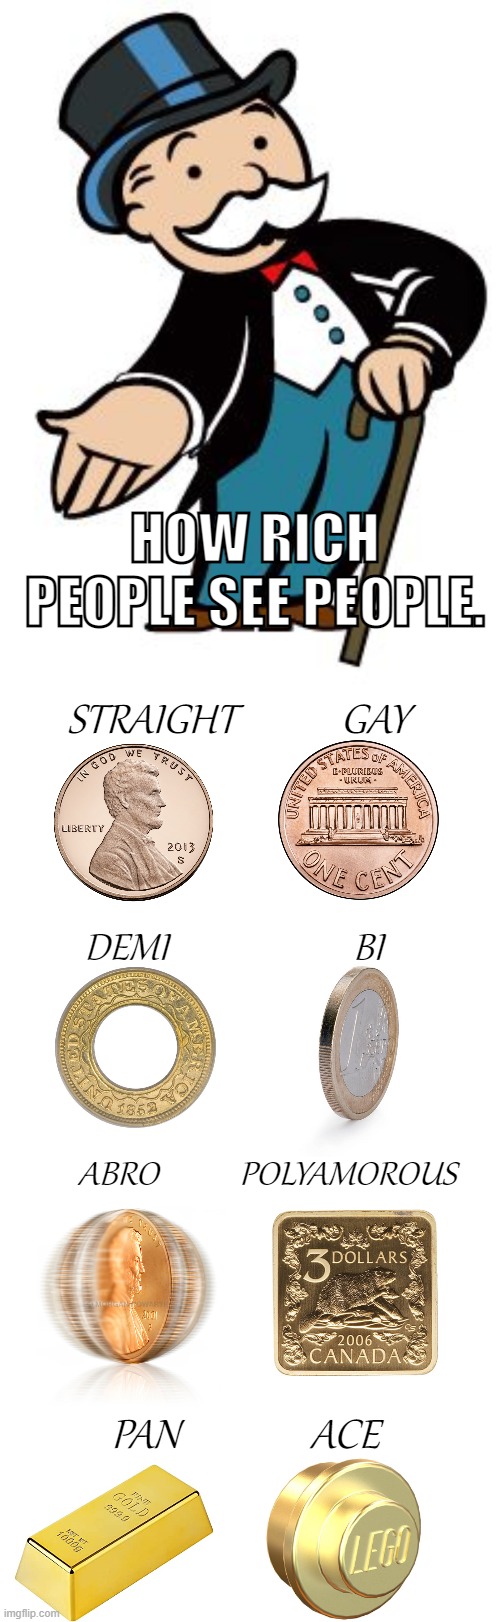 Might be considered somewhat offensive, Oh well. xD | HOW RICH PEOPLE SEE PEOPLE. STRAIGHT            GAY; DEMI                       BI; ABRO           POLYAMOROUS; PAN               ACE | image tagged in memes,blank transparent square,coins,money,moving hearts,funny | made w/ Imgflip meme maker